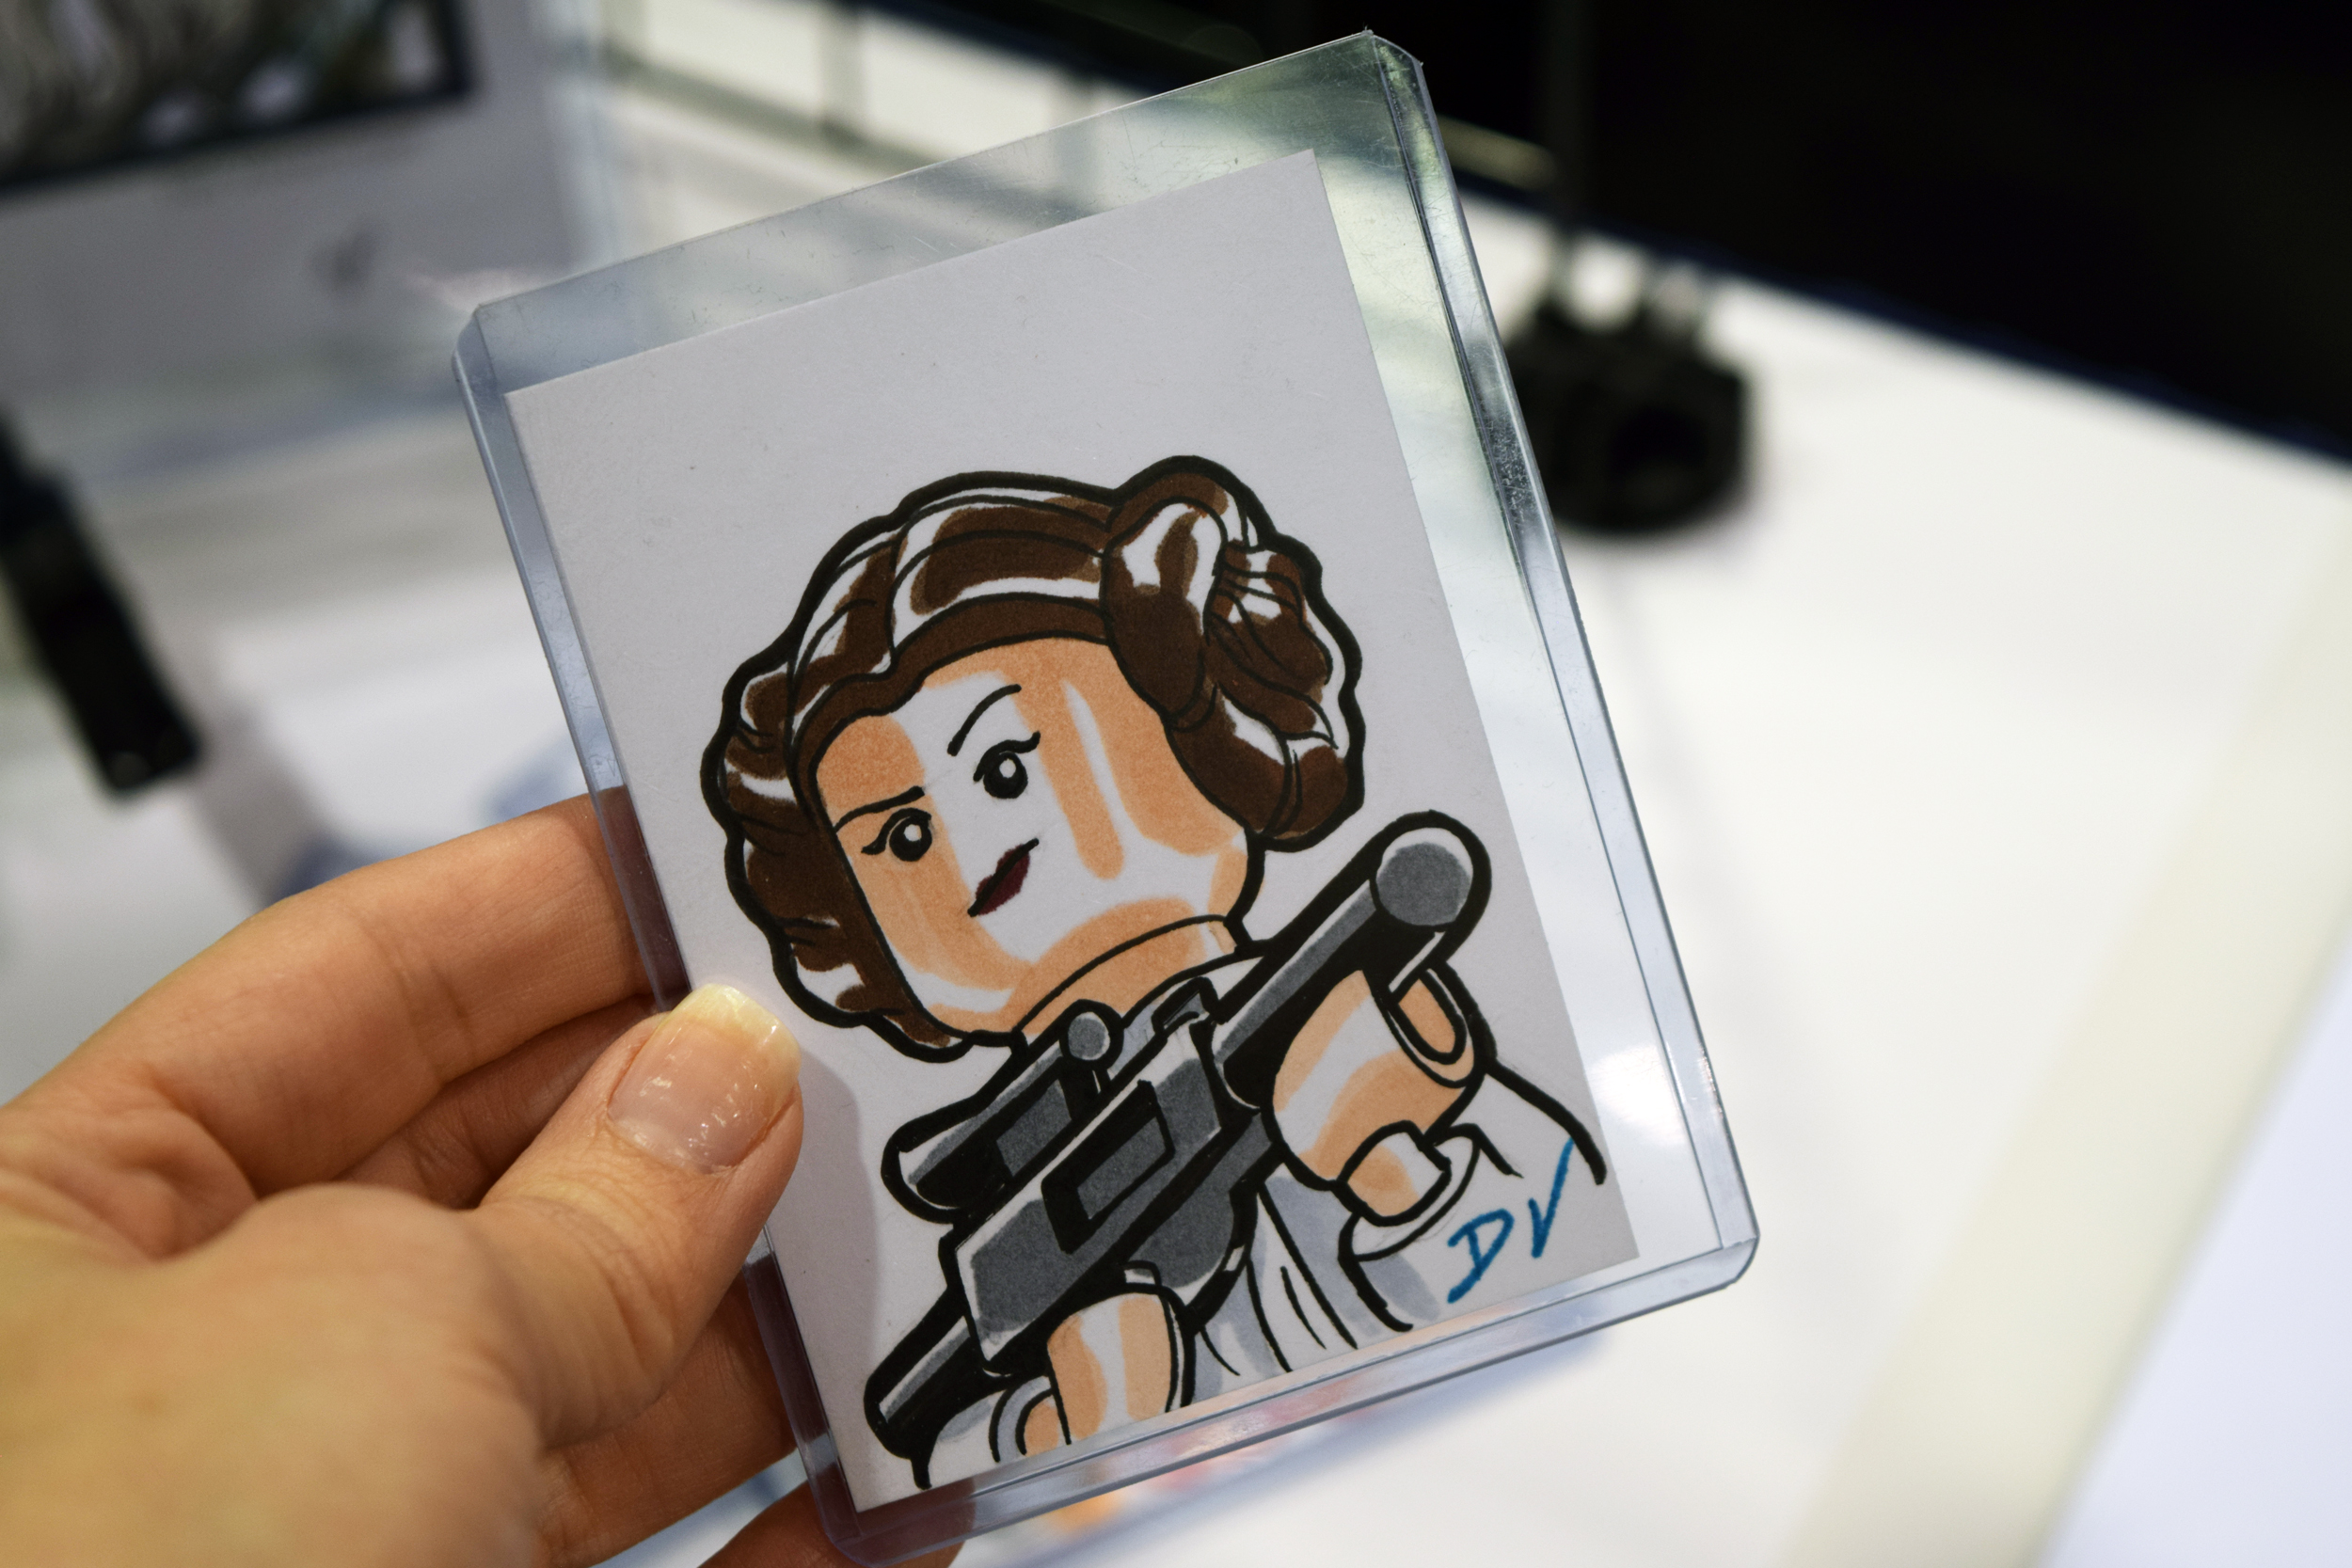 Star Wars Fan Creations at WonderCon 2019 | Anakin and His Angel